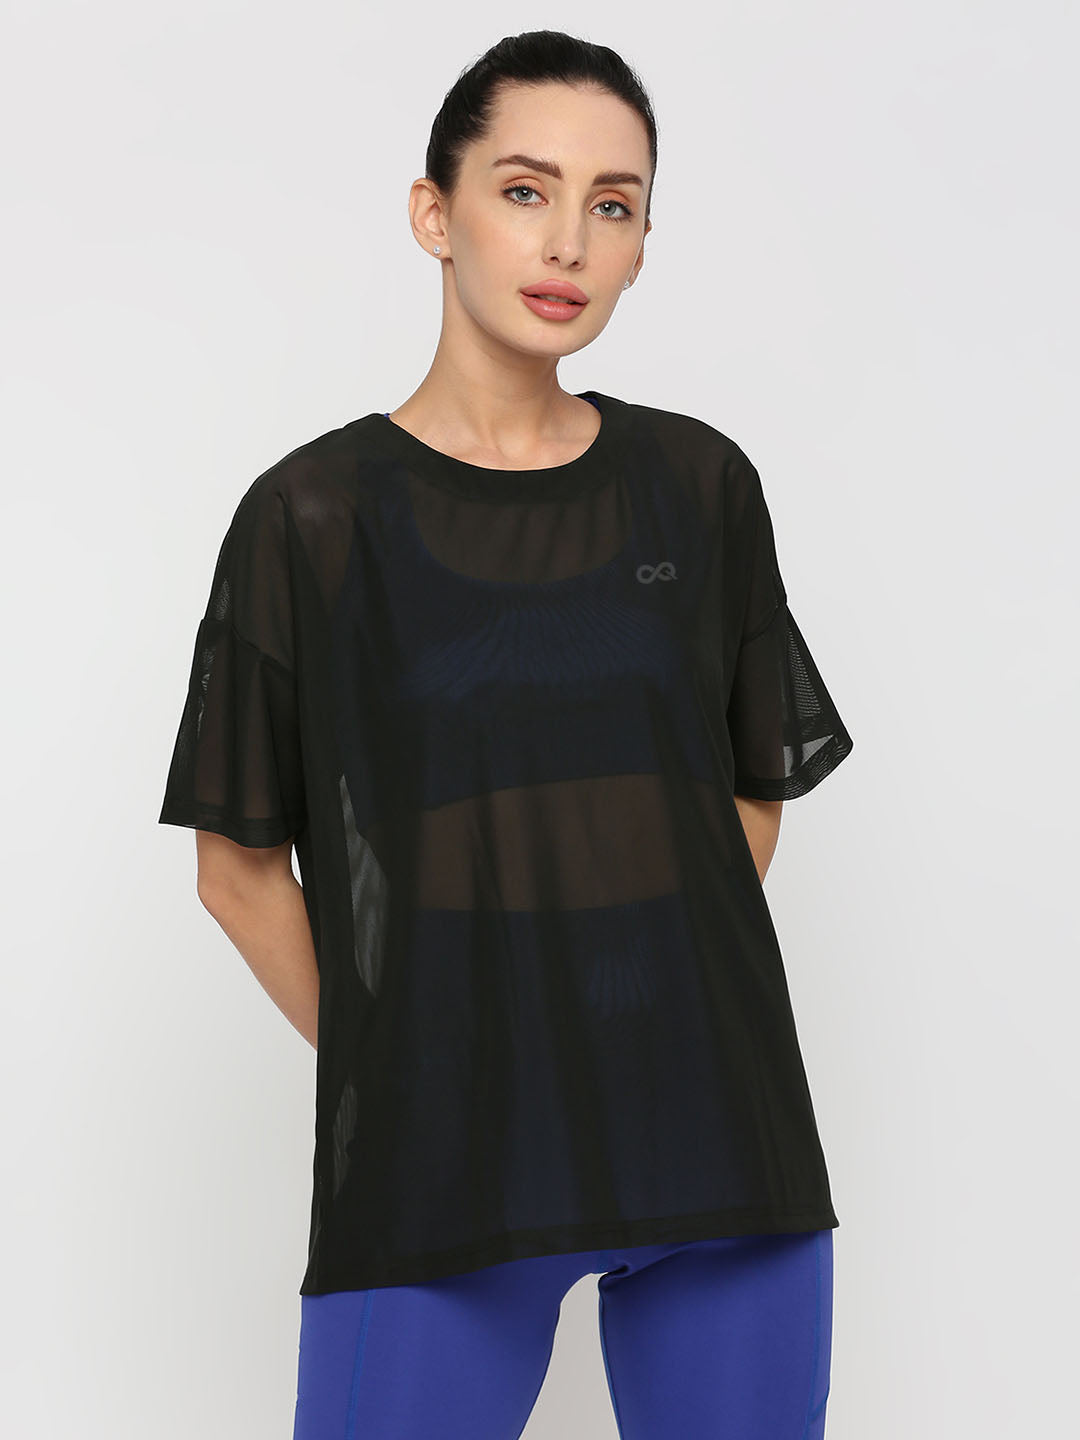 Women's Black Oversized Sports T-Shirt with Mesh - Stay Stylish and  Comfortable